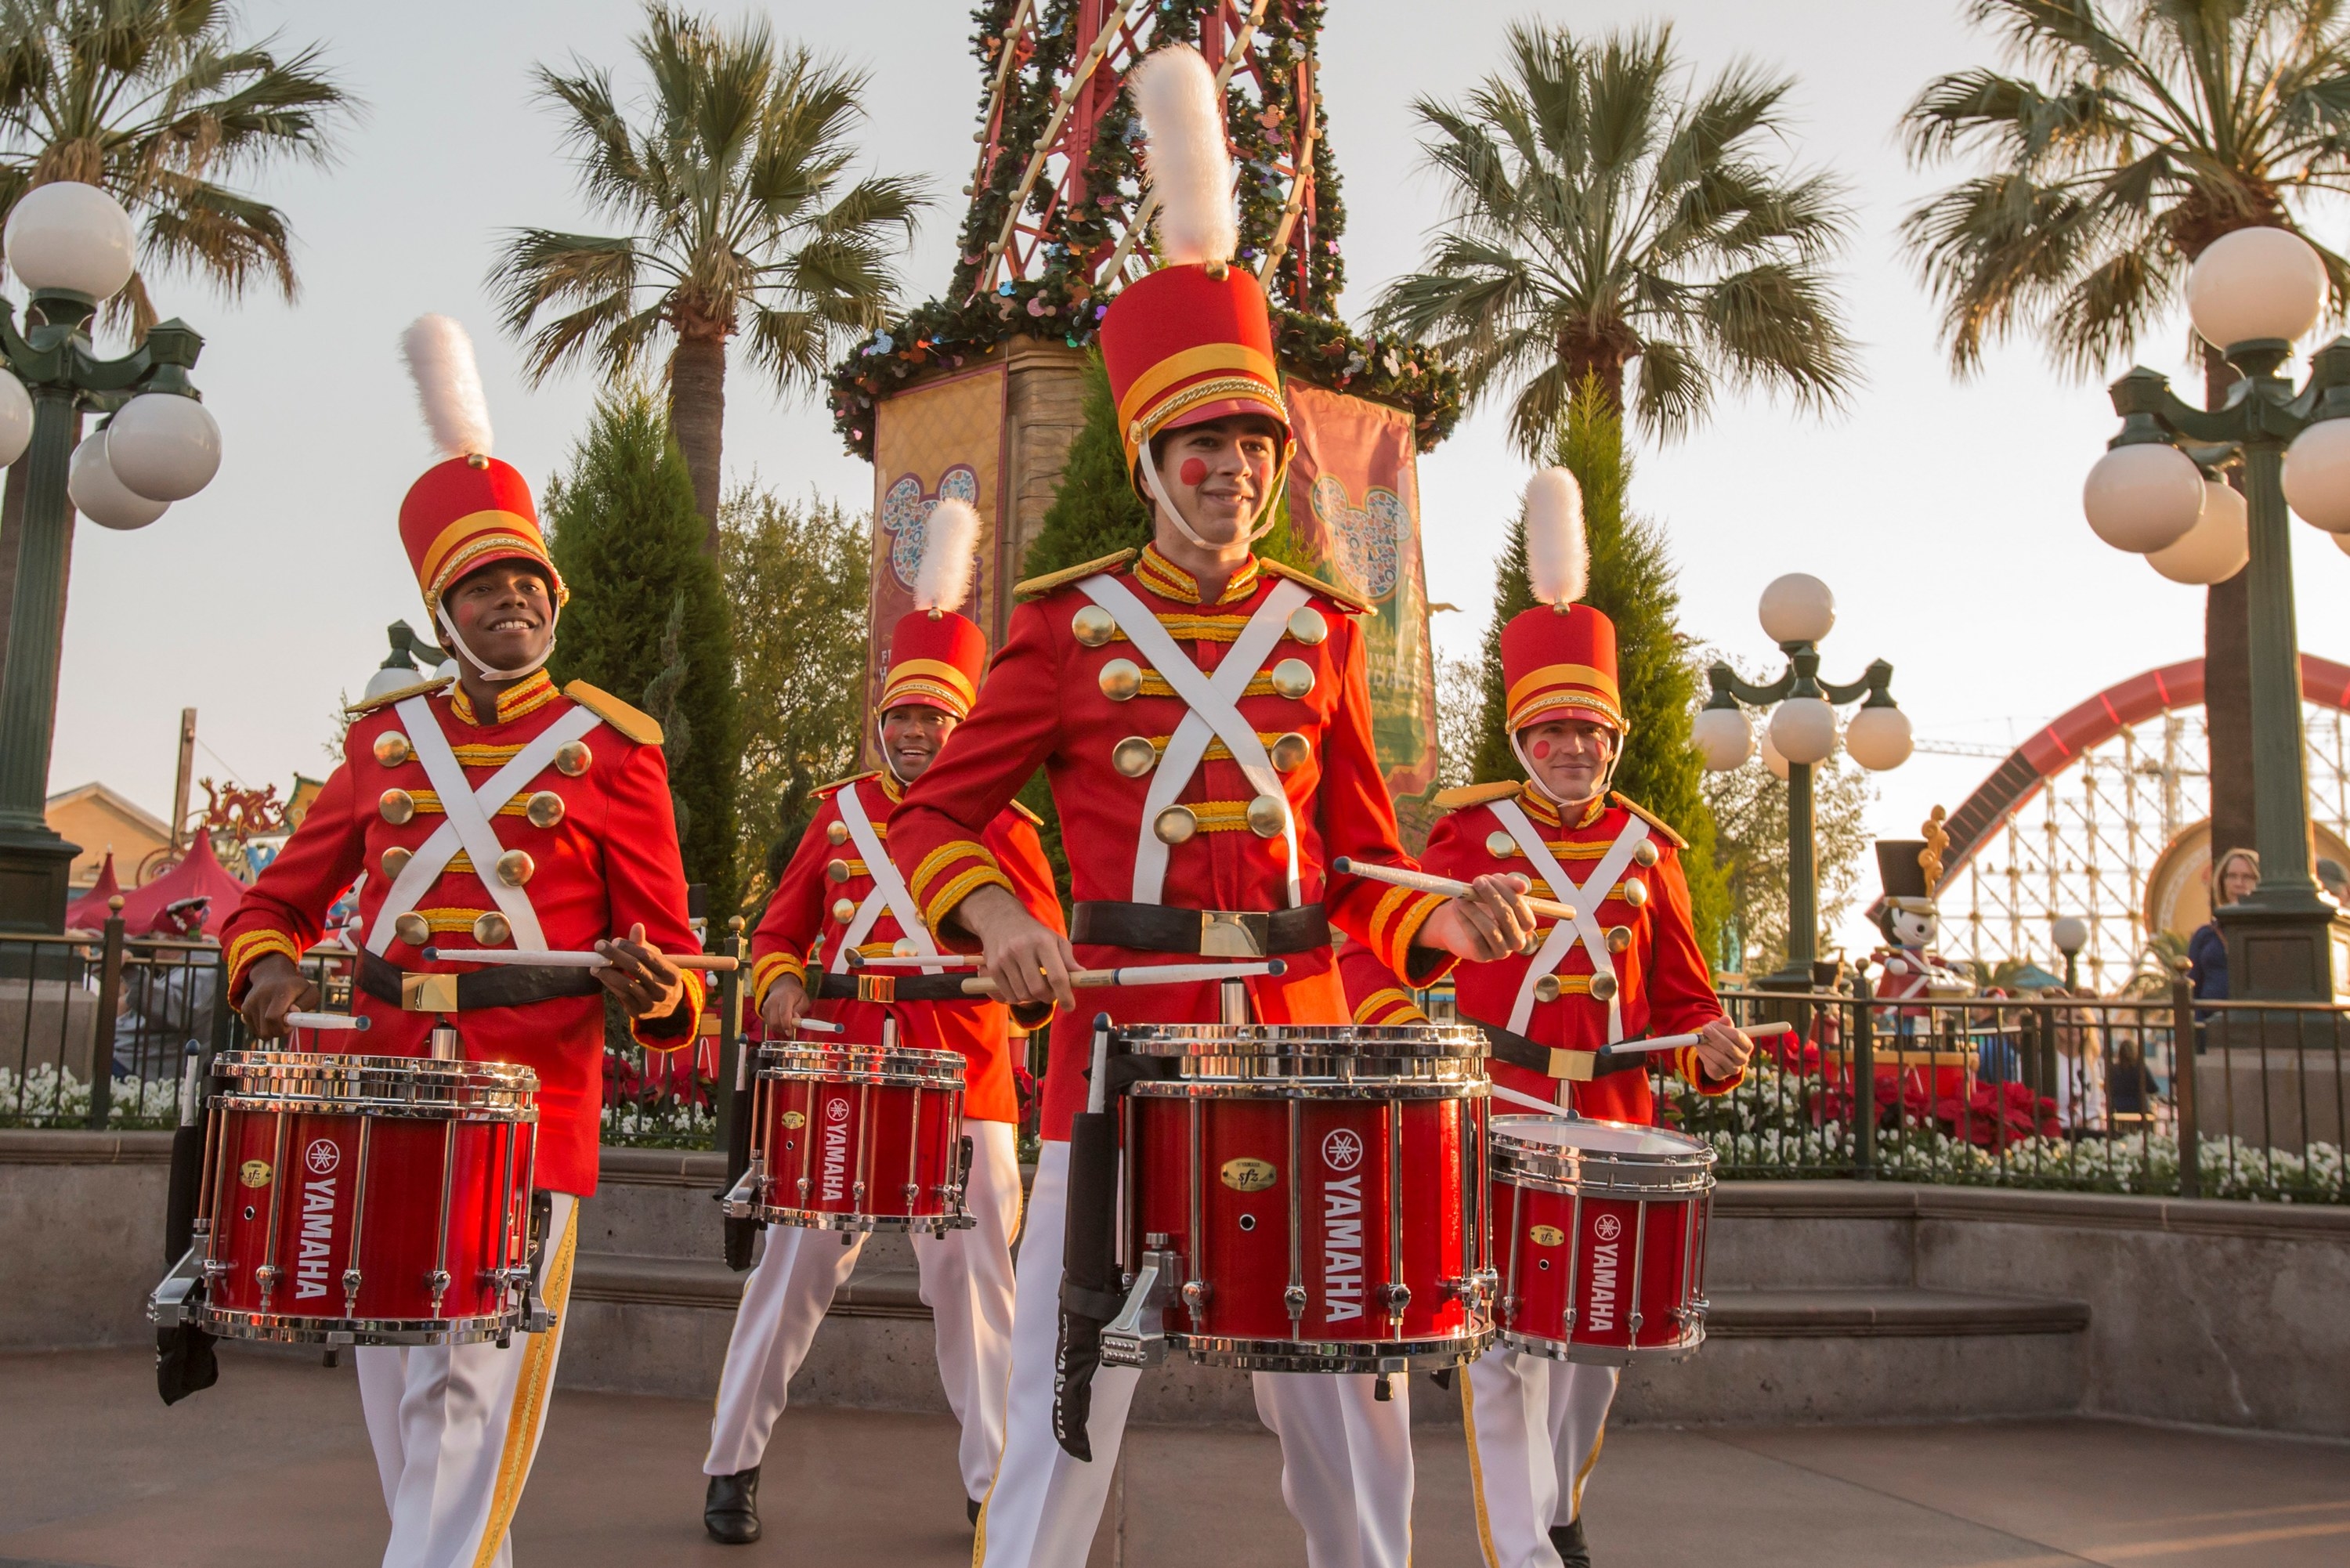 People dressed as Toy soldiers playing the drums